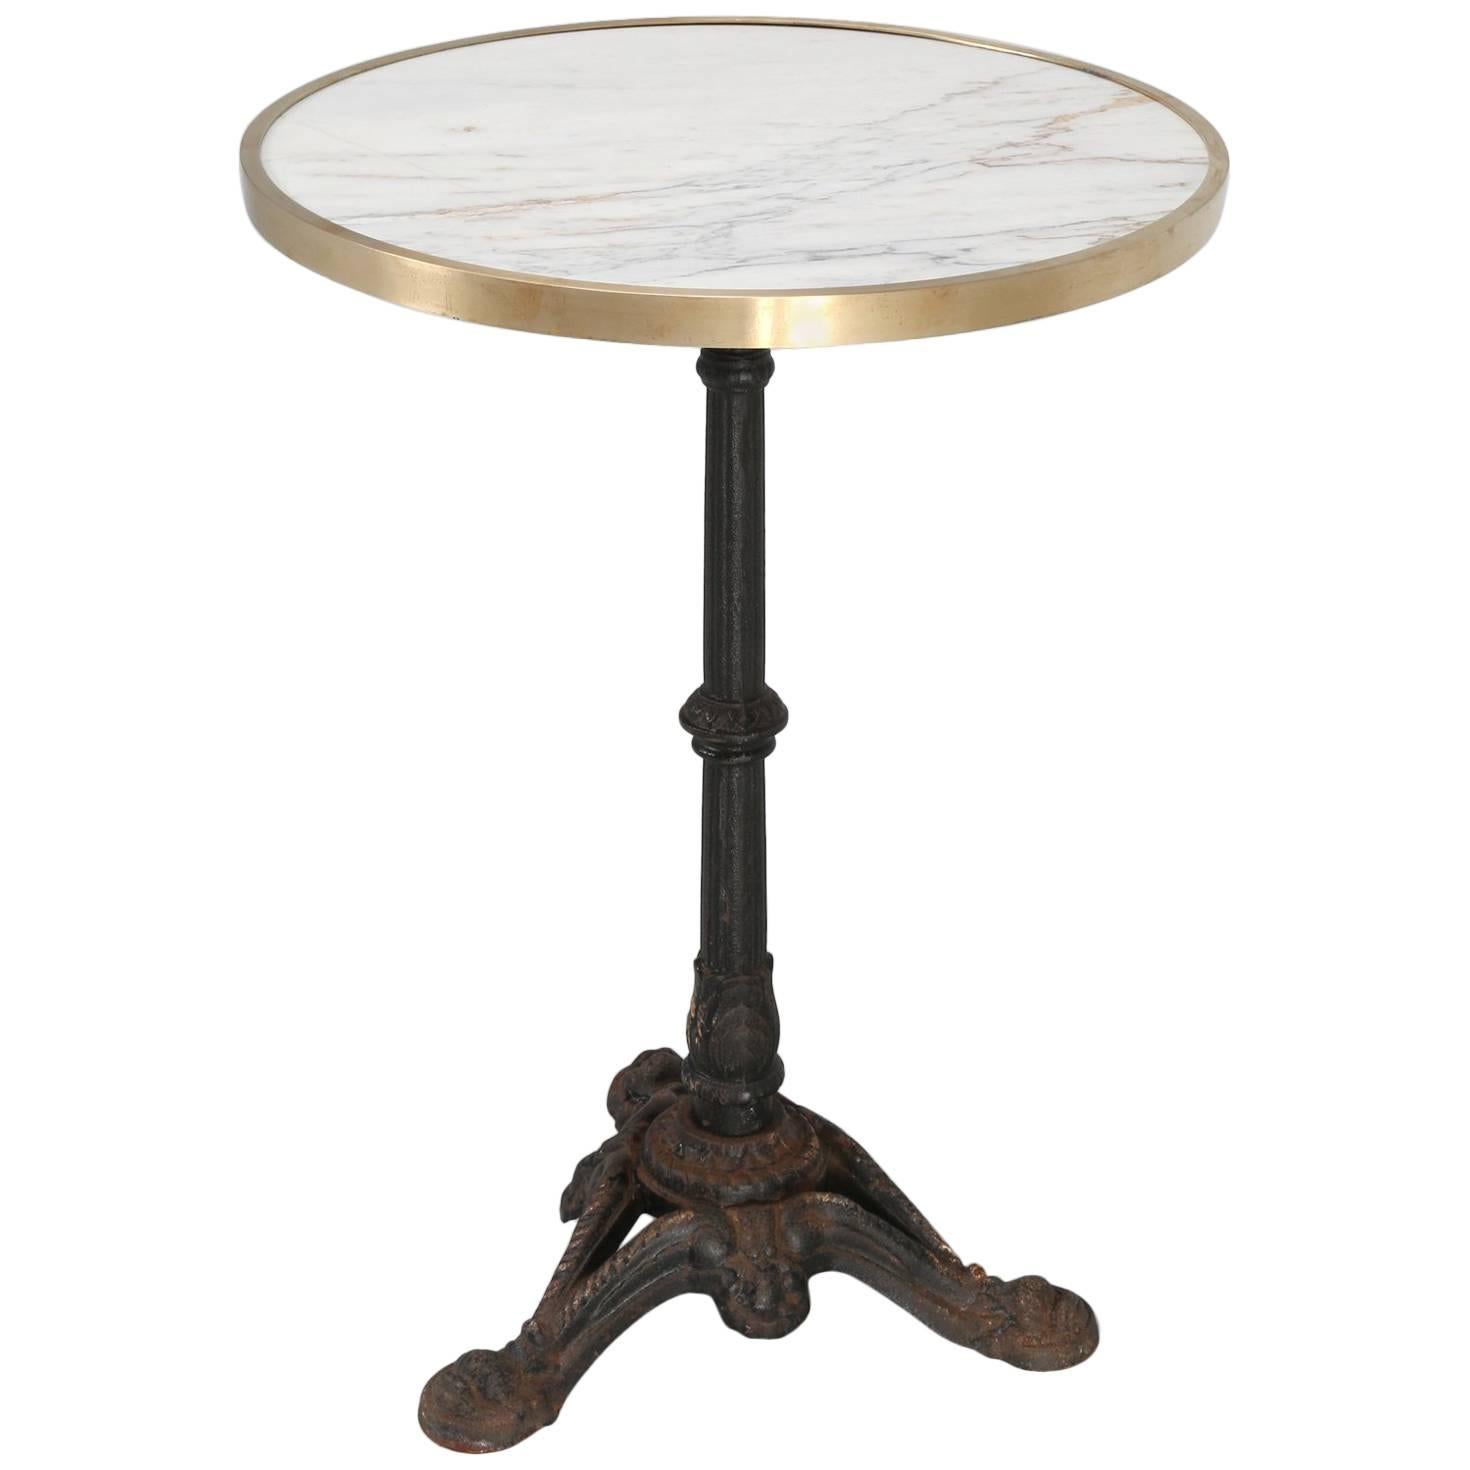 Vintage French Bistro Table in Marble and Brass, circa 1910